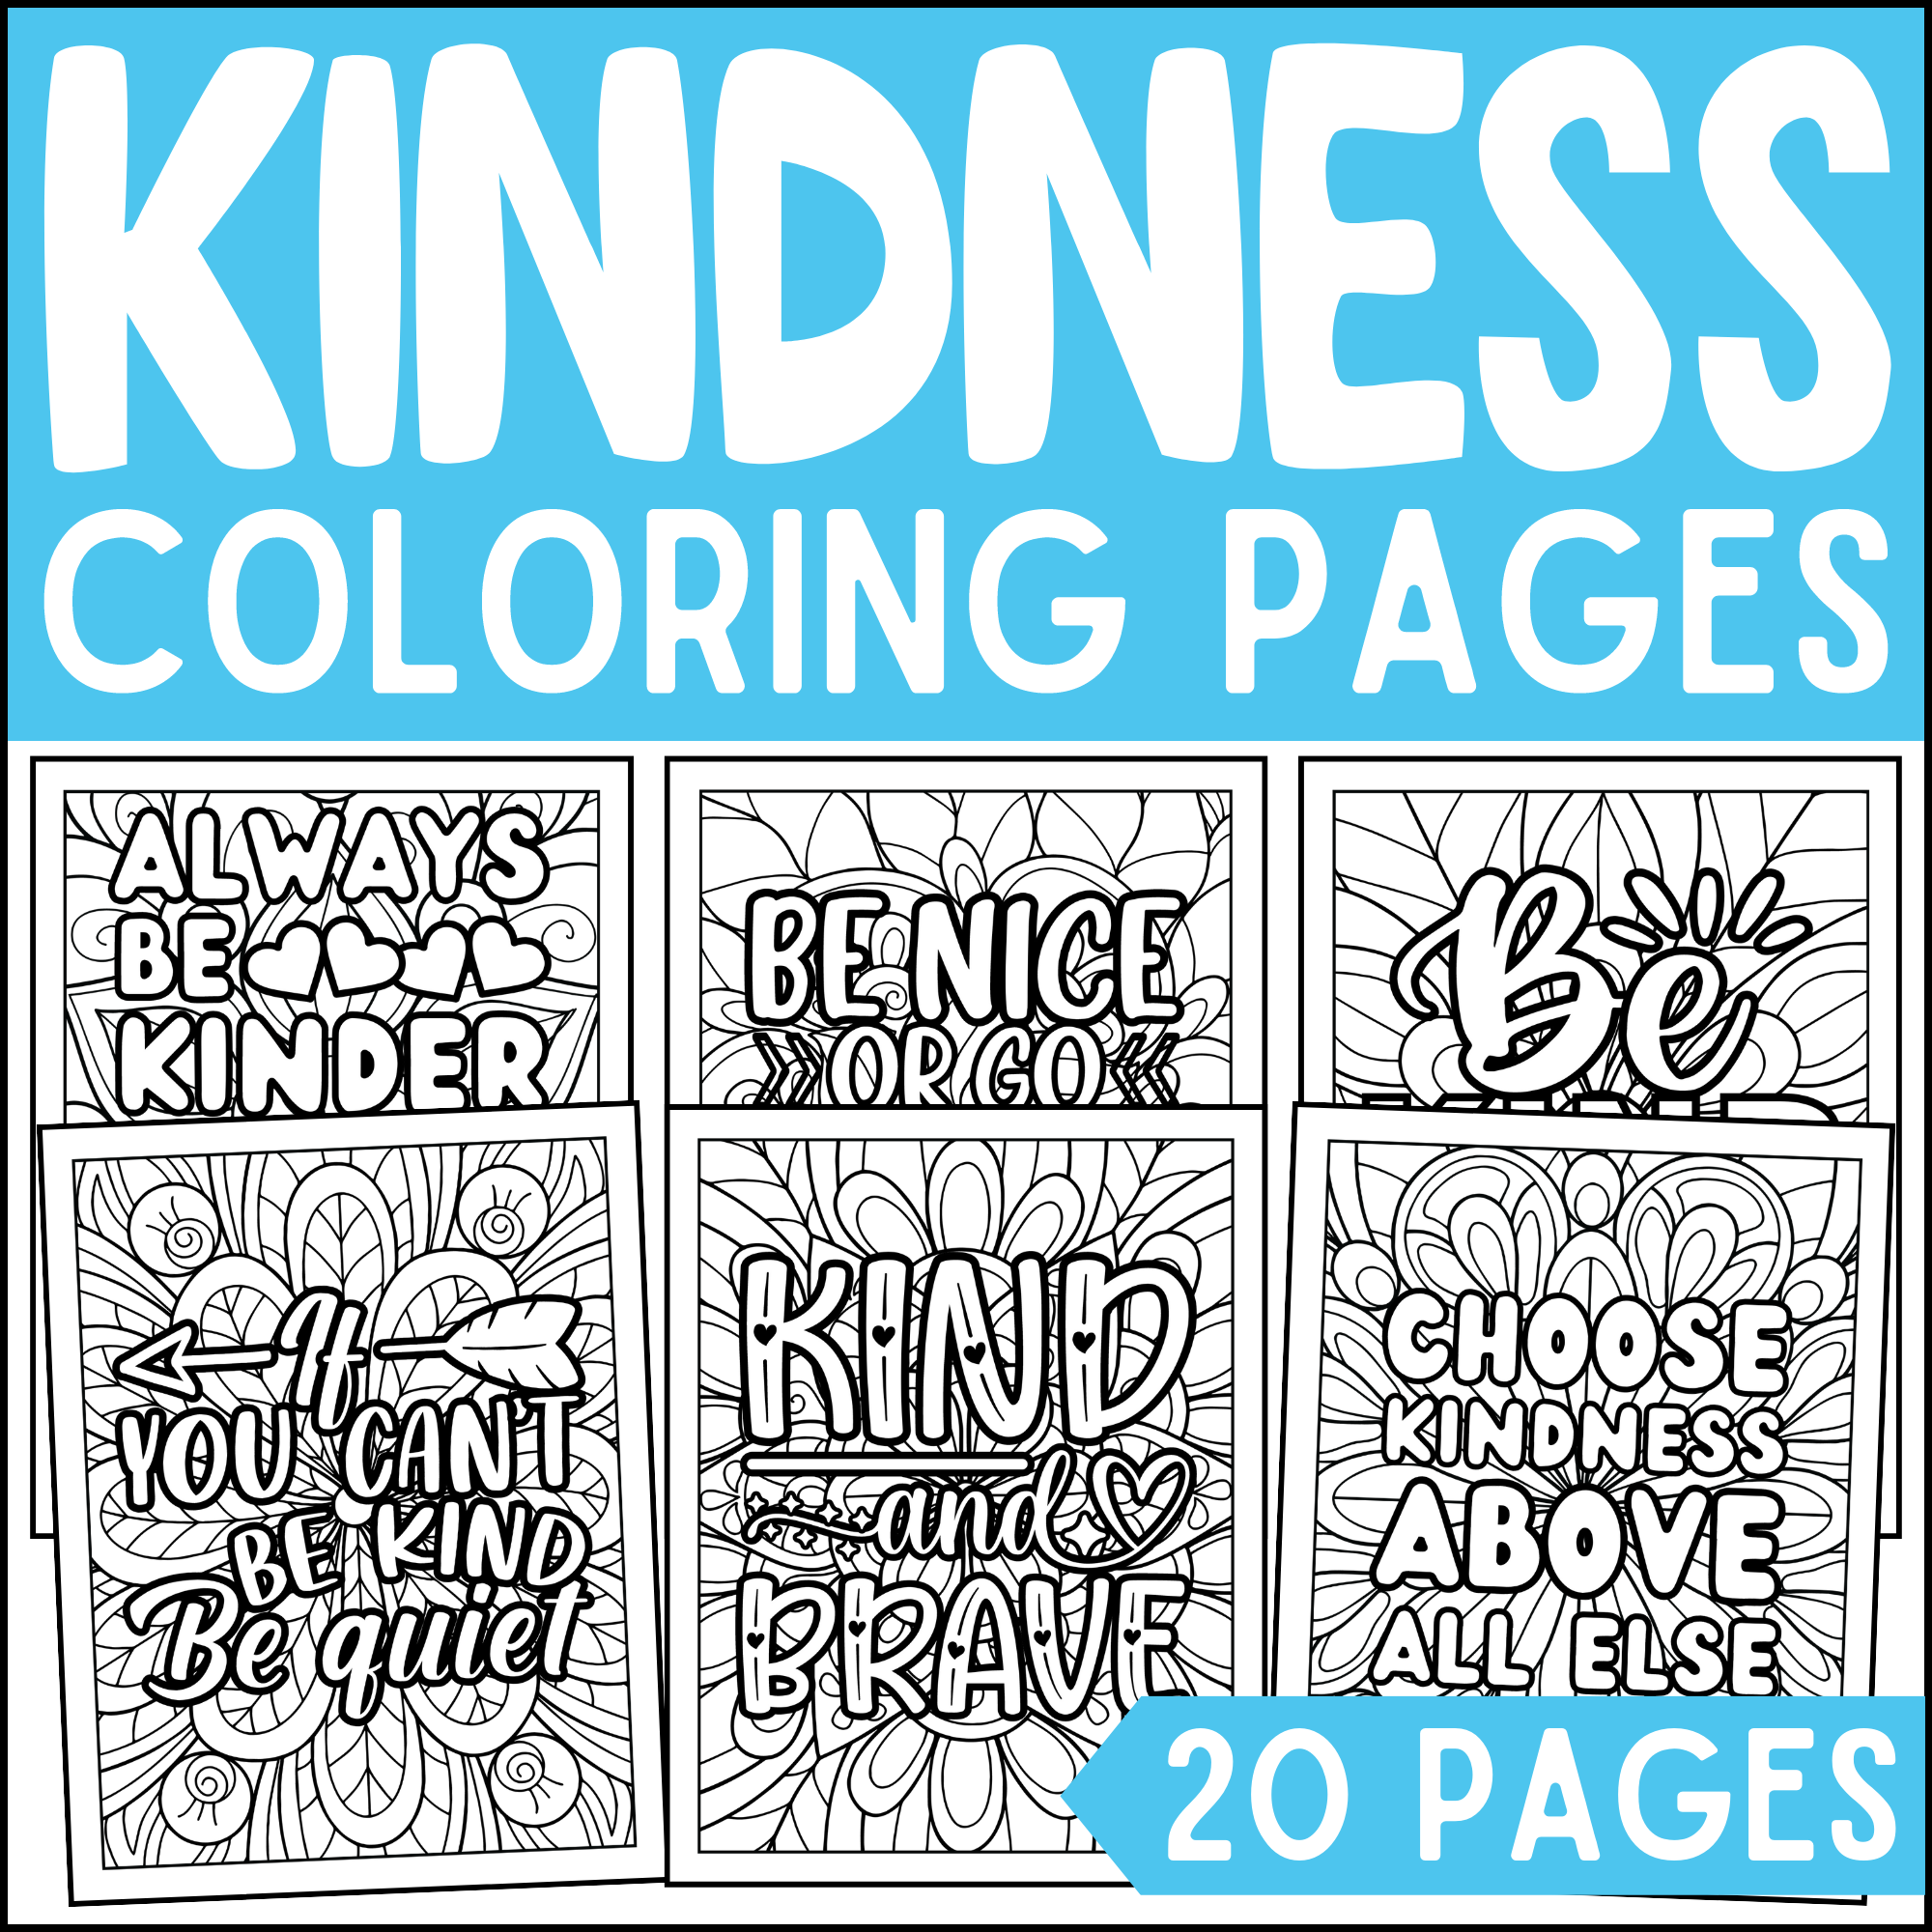 Kindness coloring pages kindness activities random acts of kindness w made by teachers